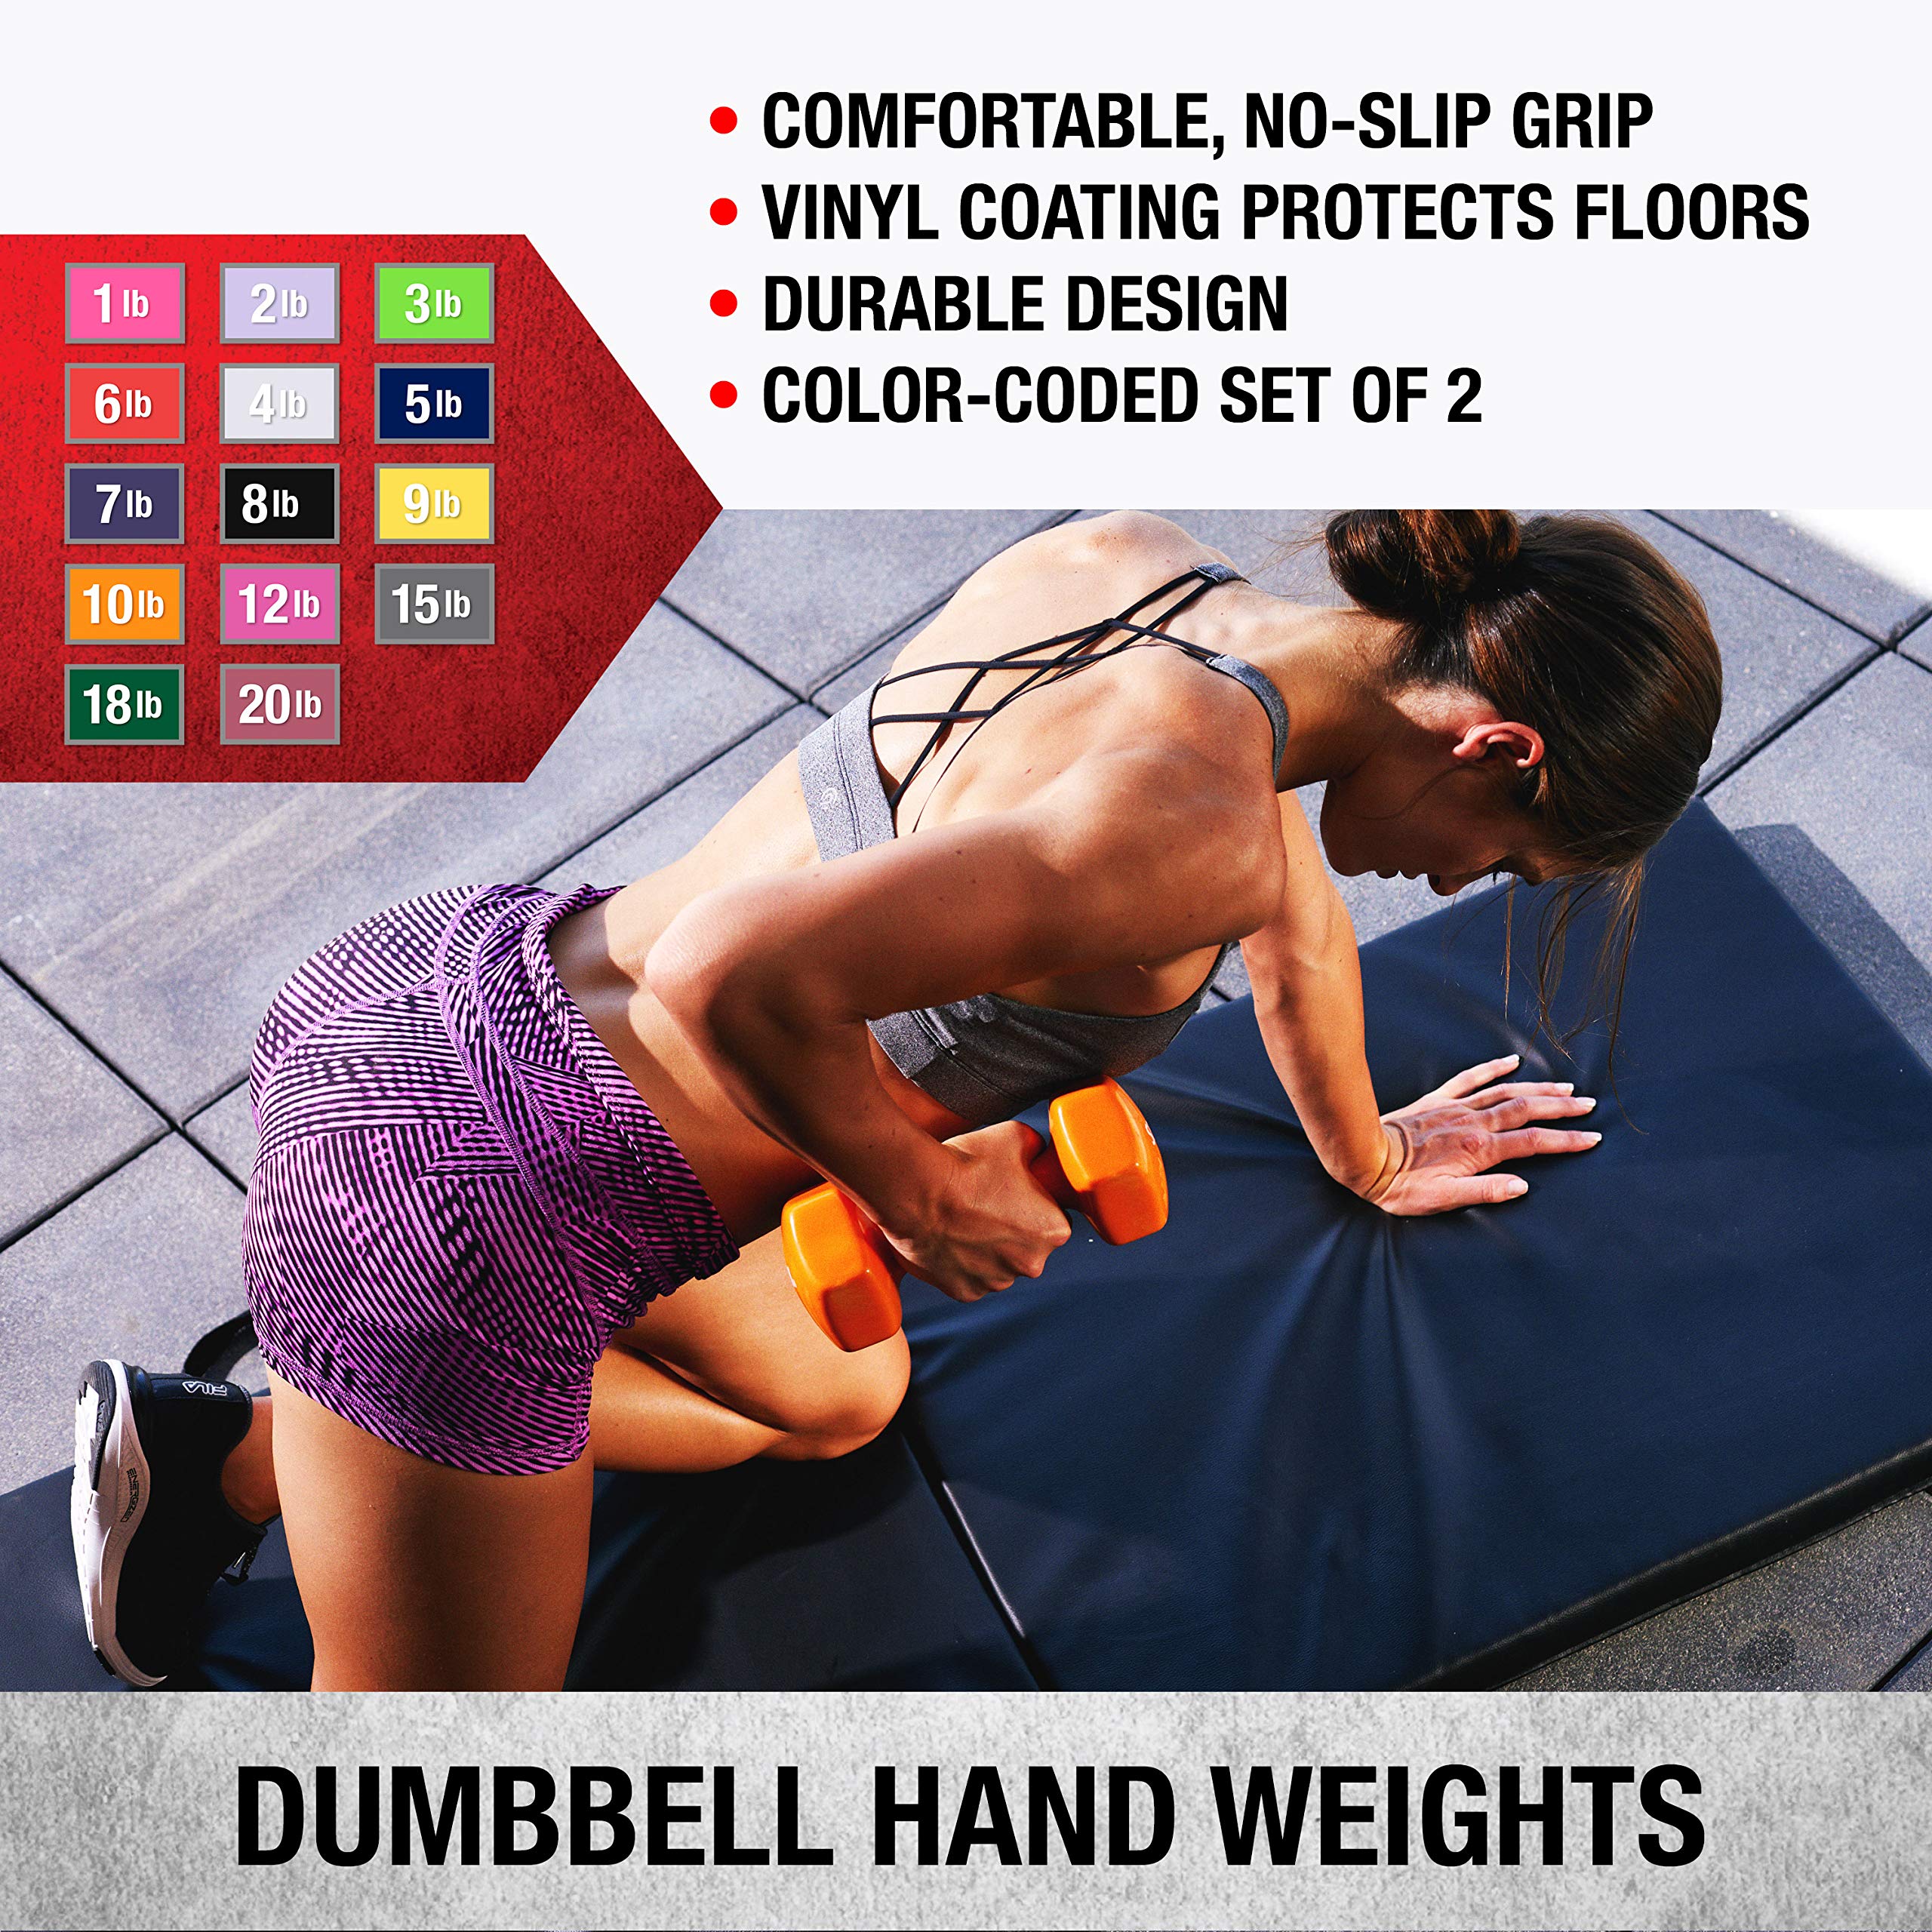 Dumbbells Hand Weights Set of 2 - Vinyl Coated Exercise & Fitness Dumbbell for Home Gym Equipment Workouts Strength Training Free Weights for Women, Men (1-10 Pound, 12, 15, 18, 20 lb)